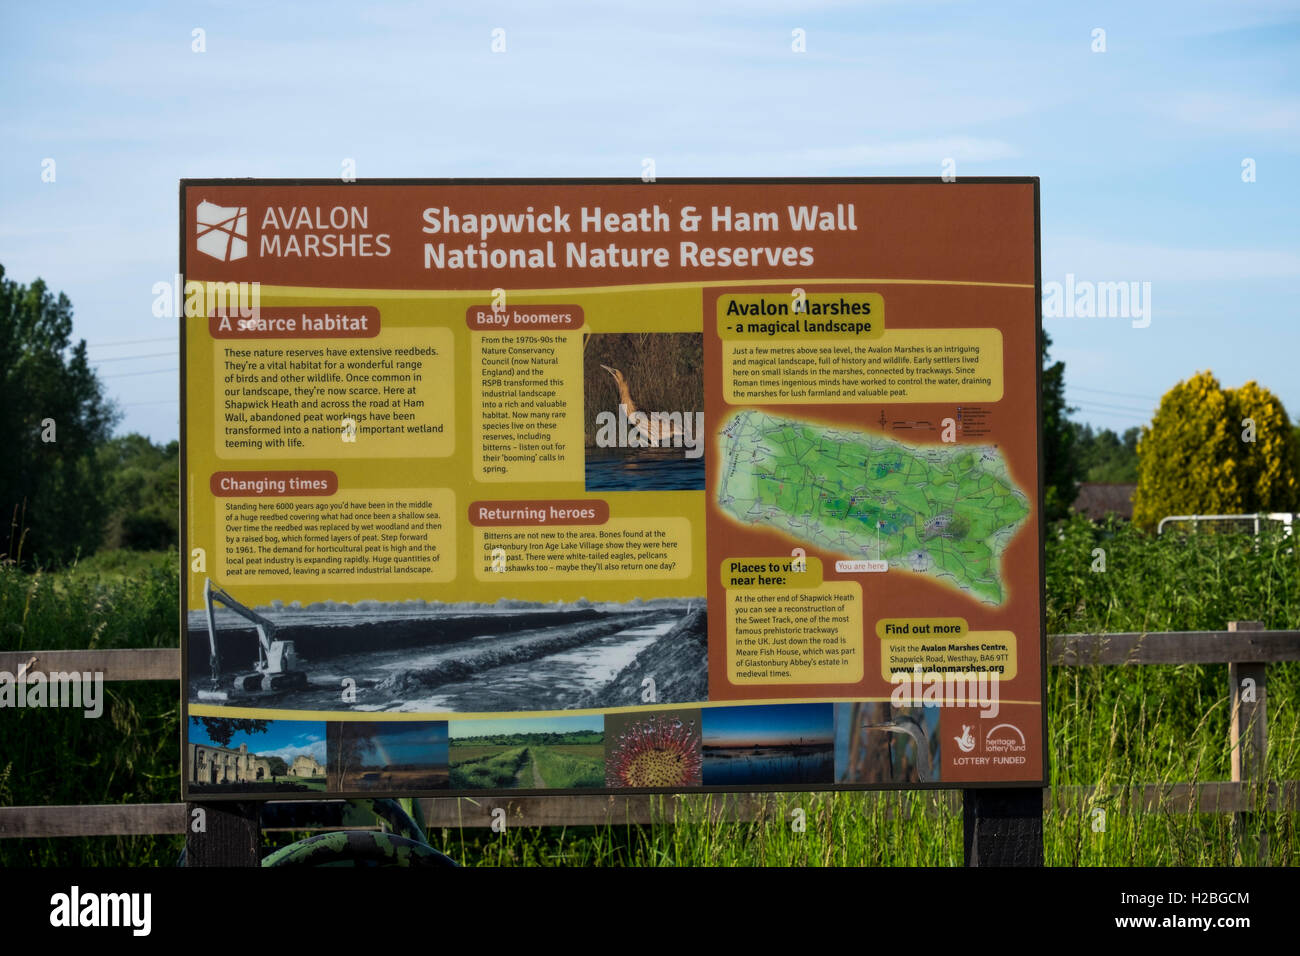 Information sign,Shapwick Heath and Ham Wall National Nature Reserves, part of Avalon Marshes, Somerset Levels, England, UK Stock Photo